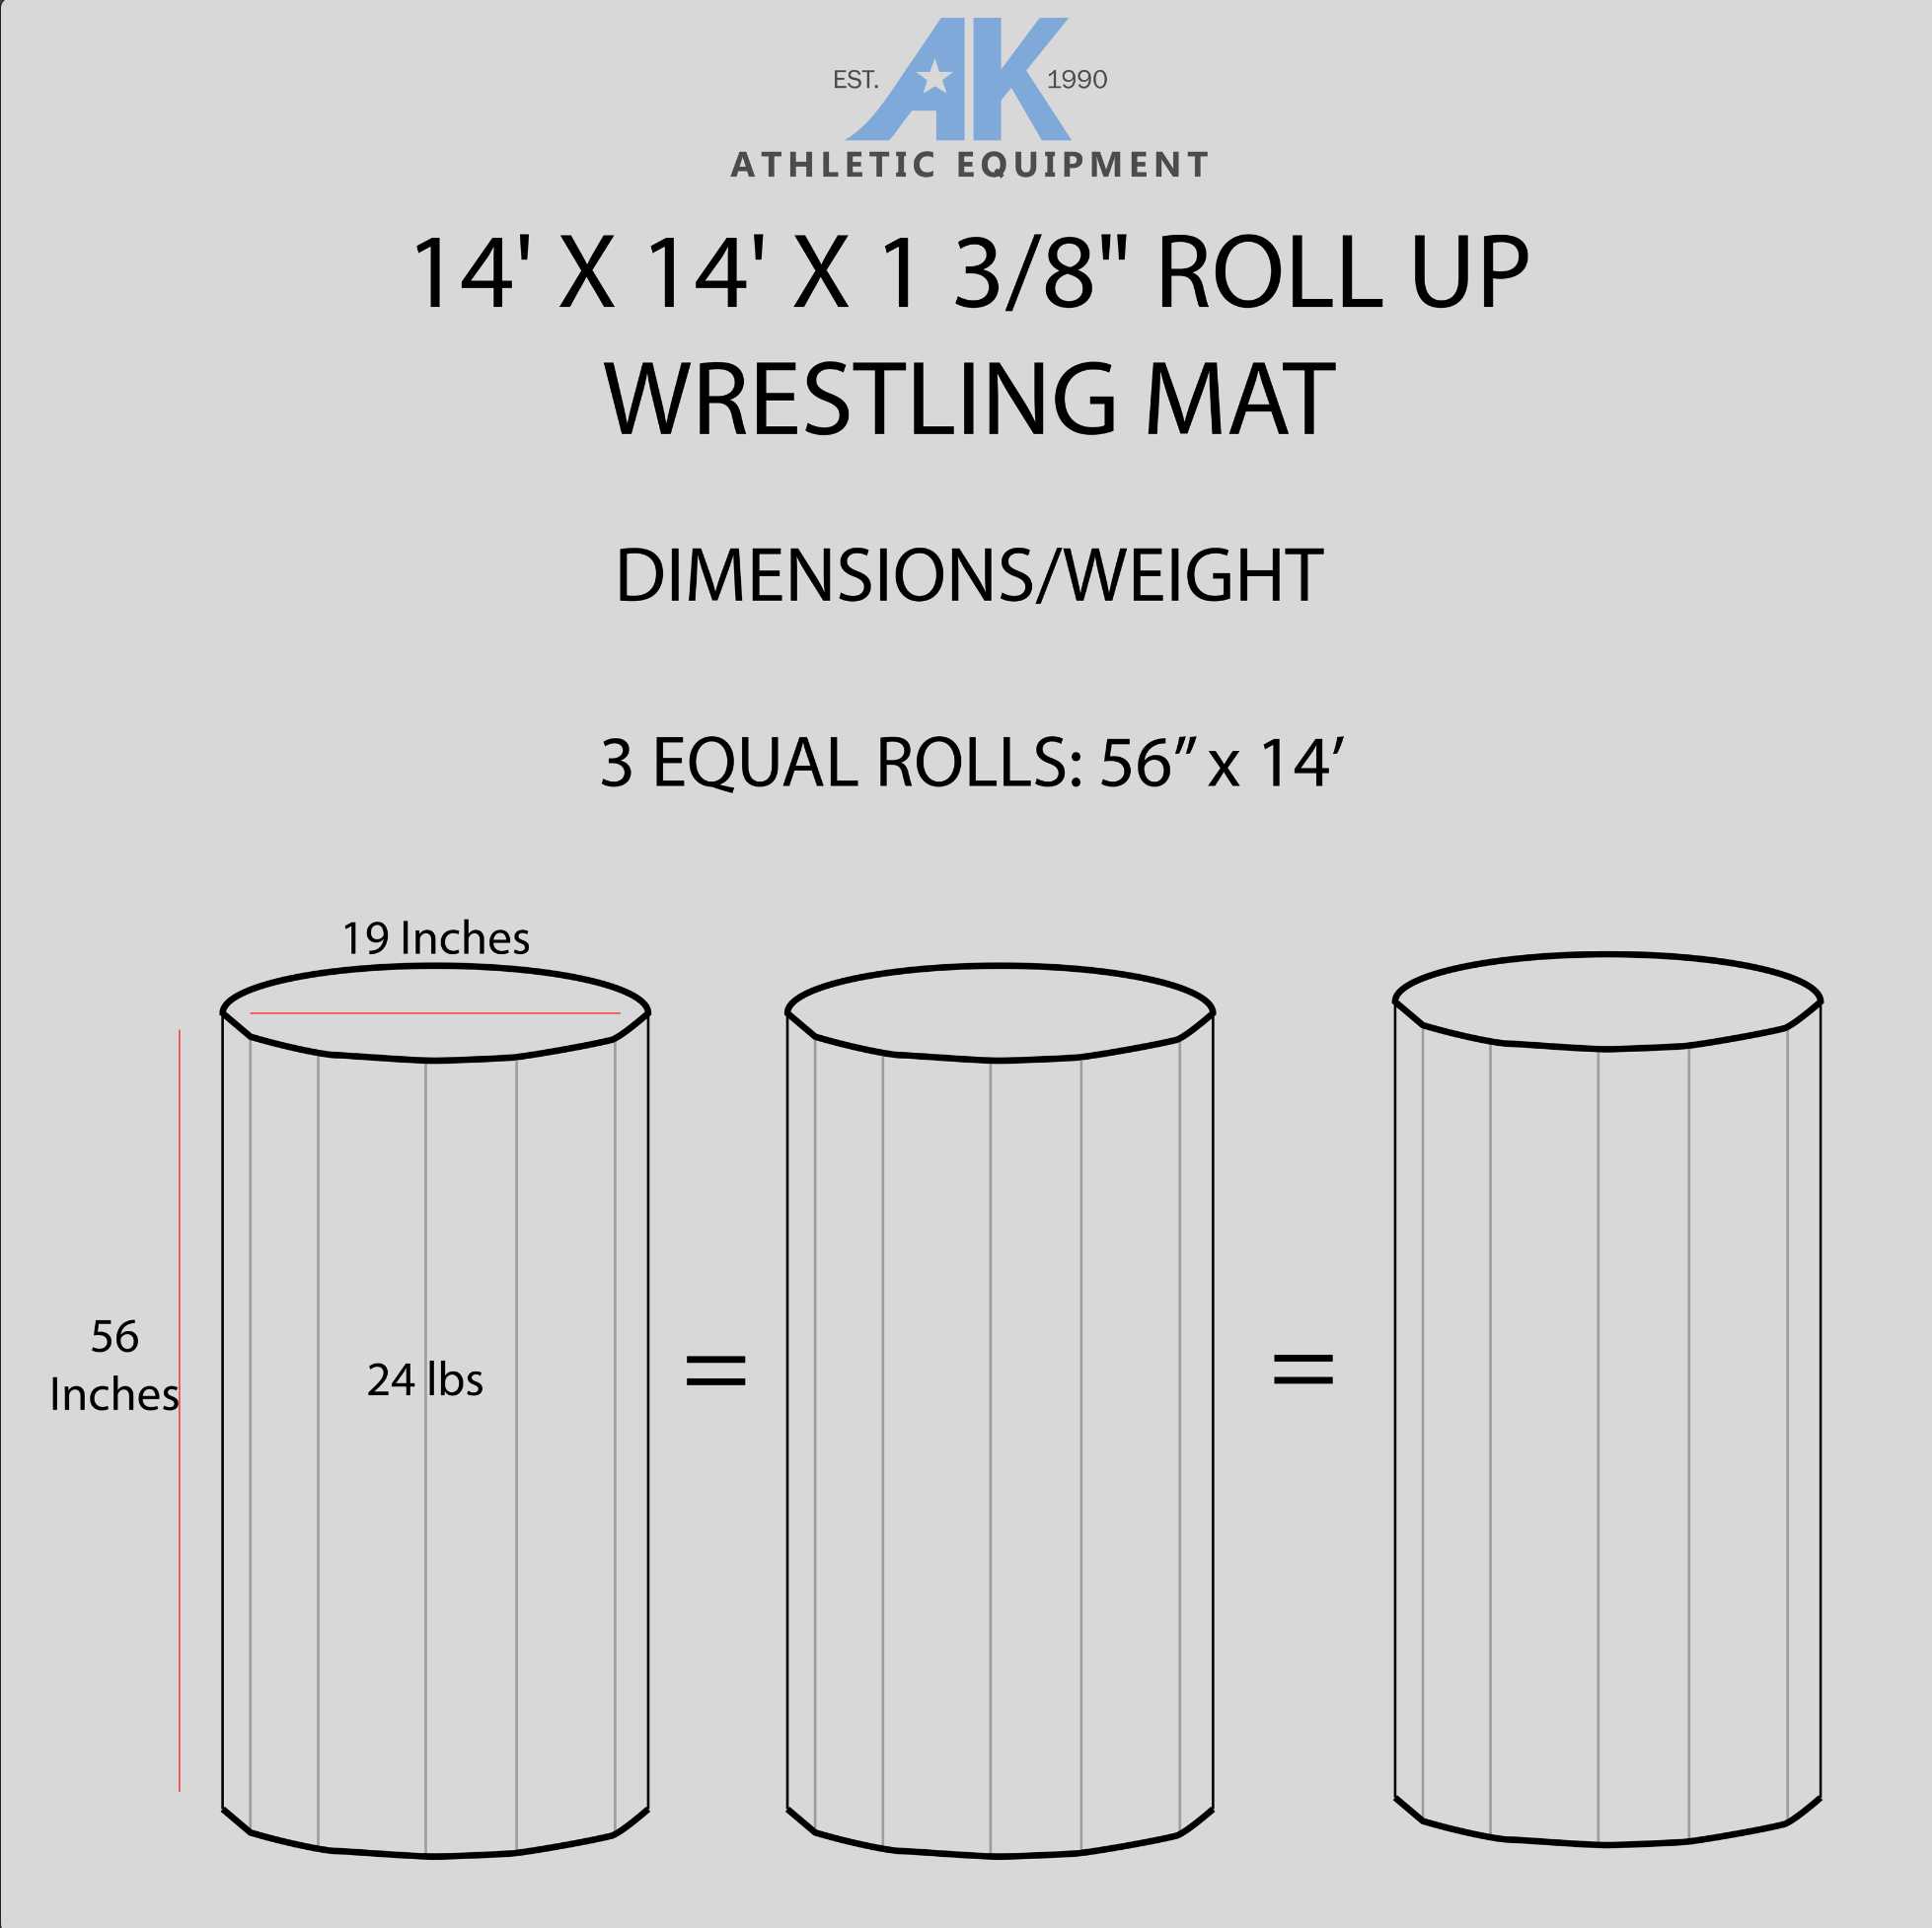 14 x 14 wrestling mat is handmade in the USA in 3 sections. Easily roll-up and store your wrestling mat.